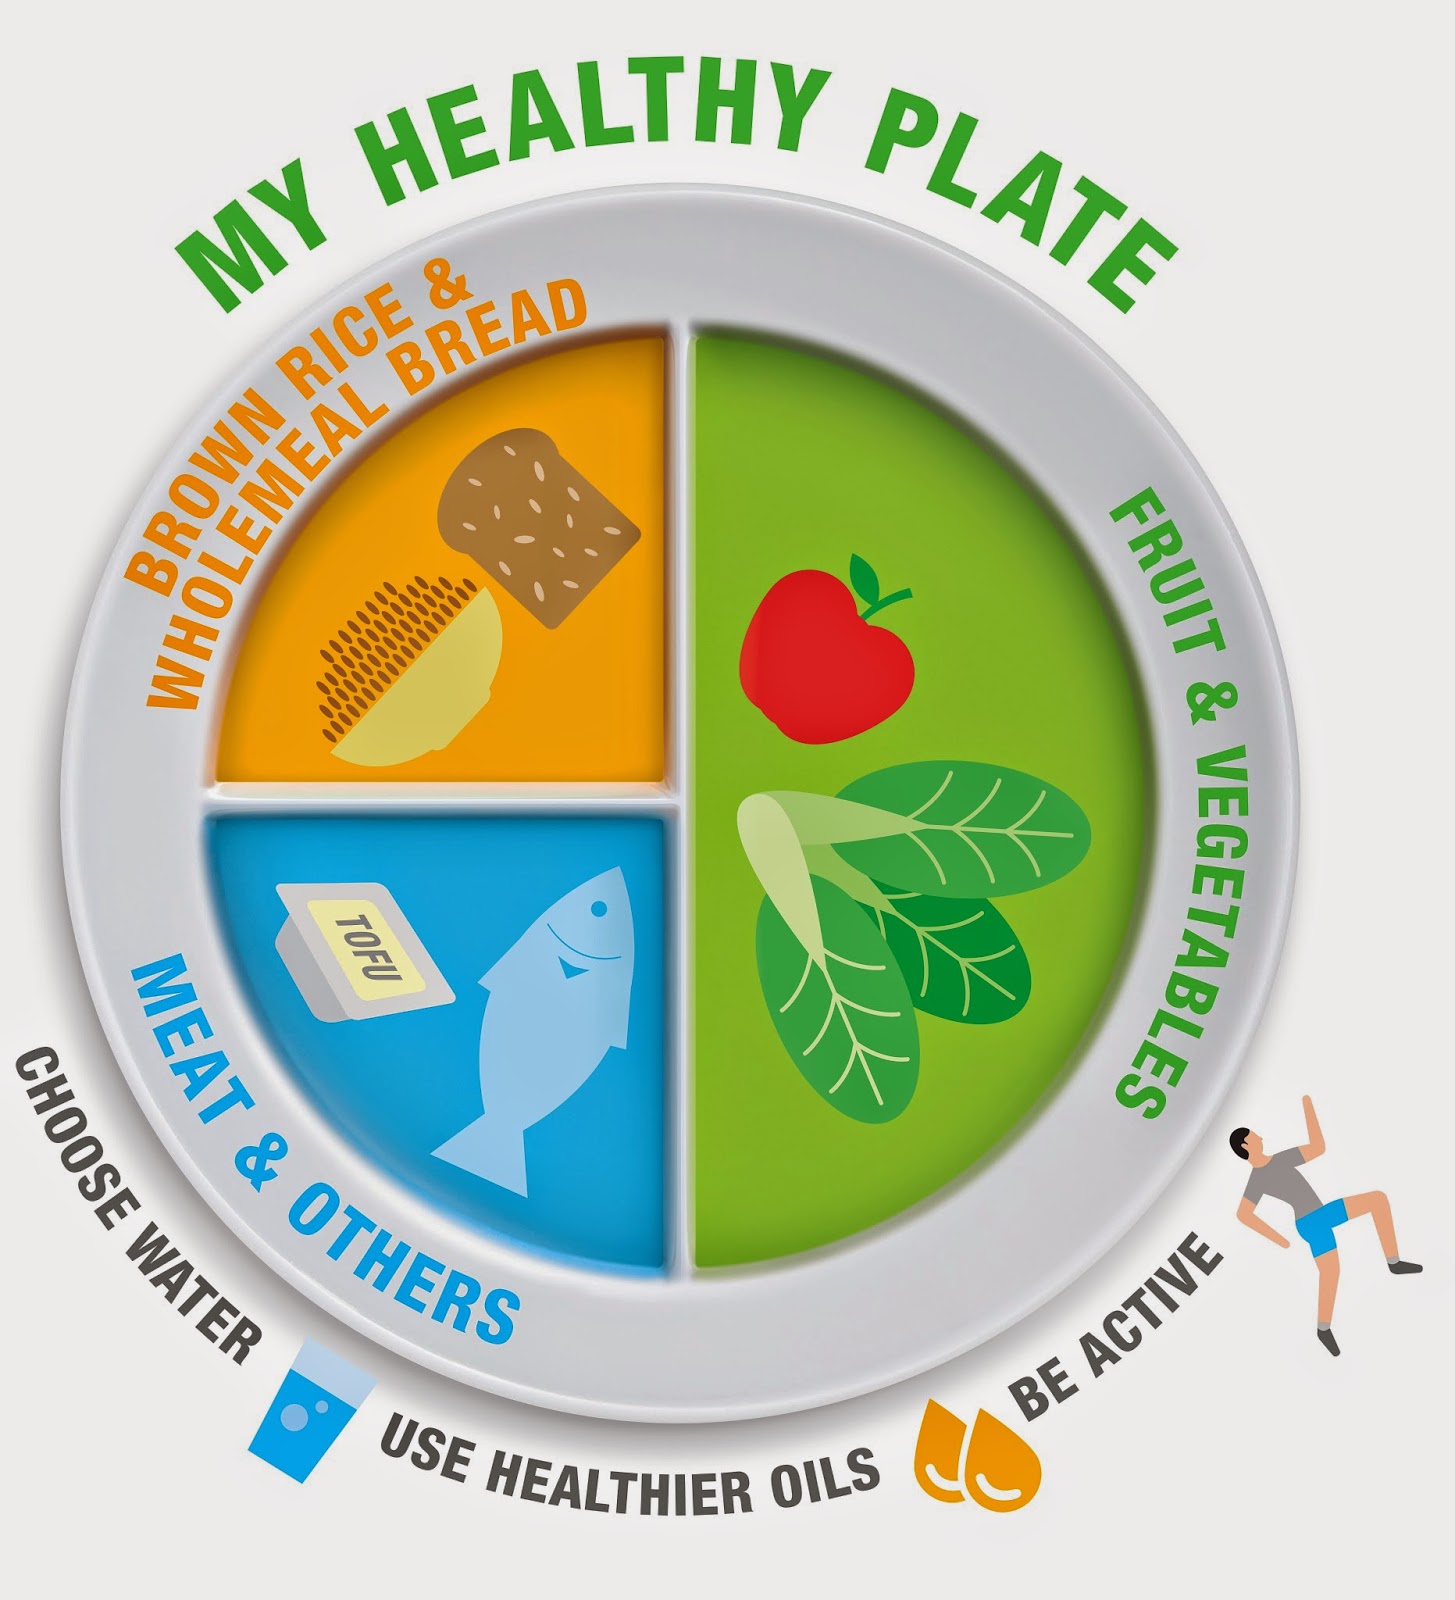 Healthy Eating Plate - BEST HOME DESIGN IDEAS